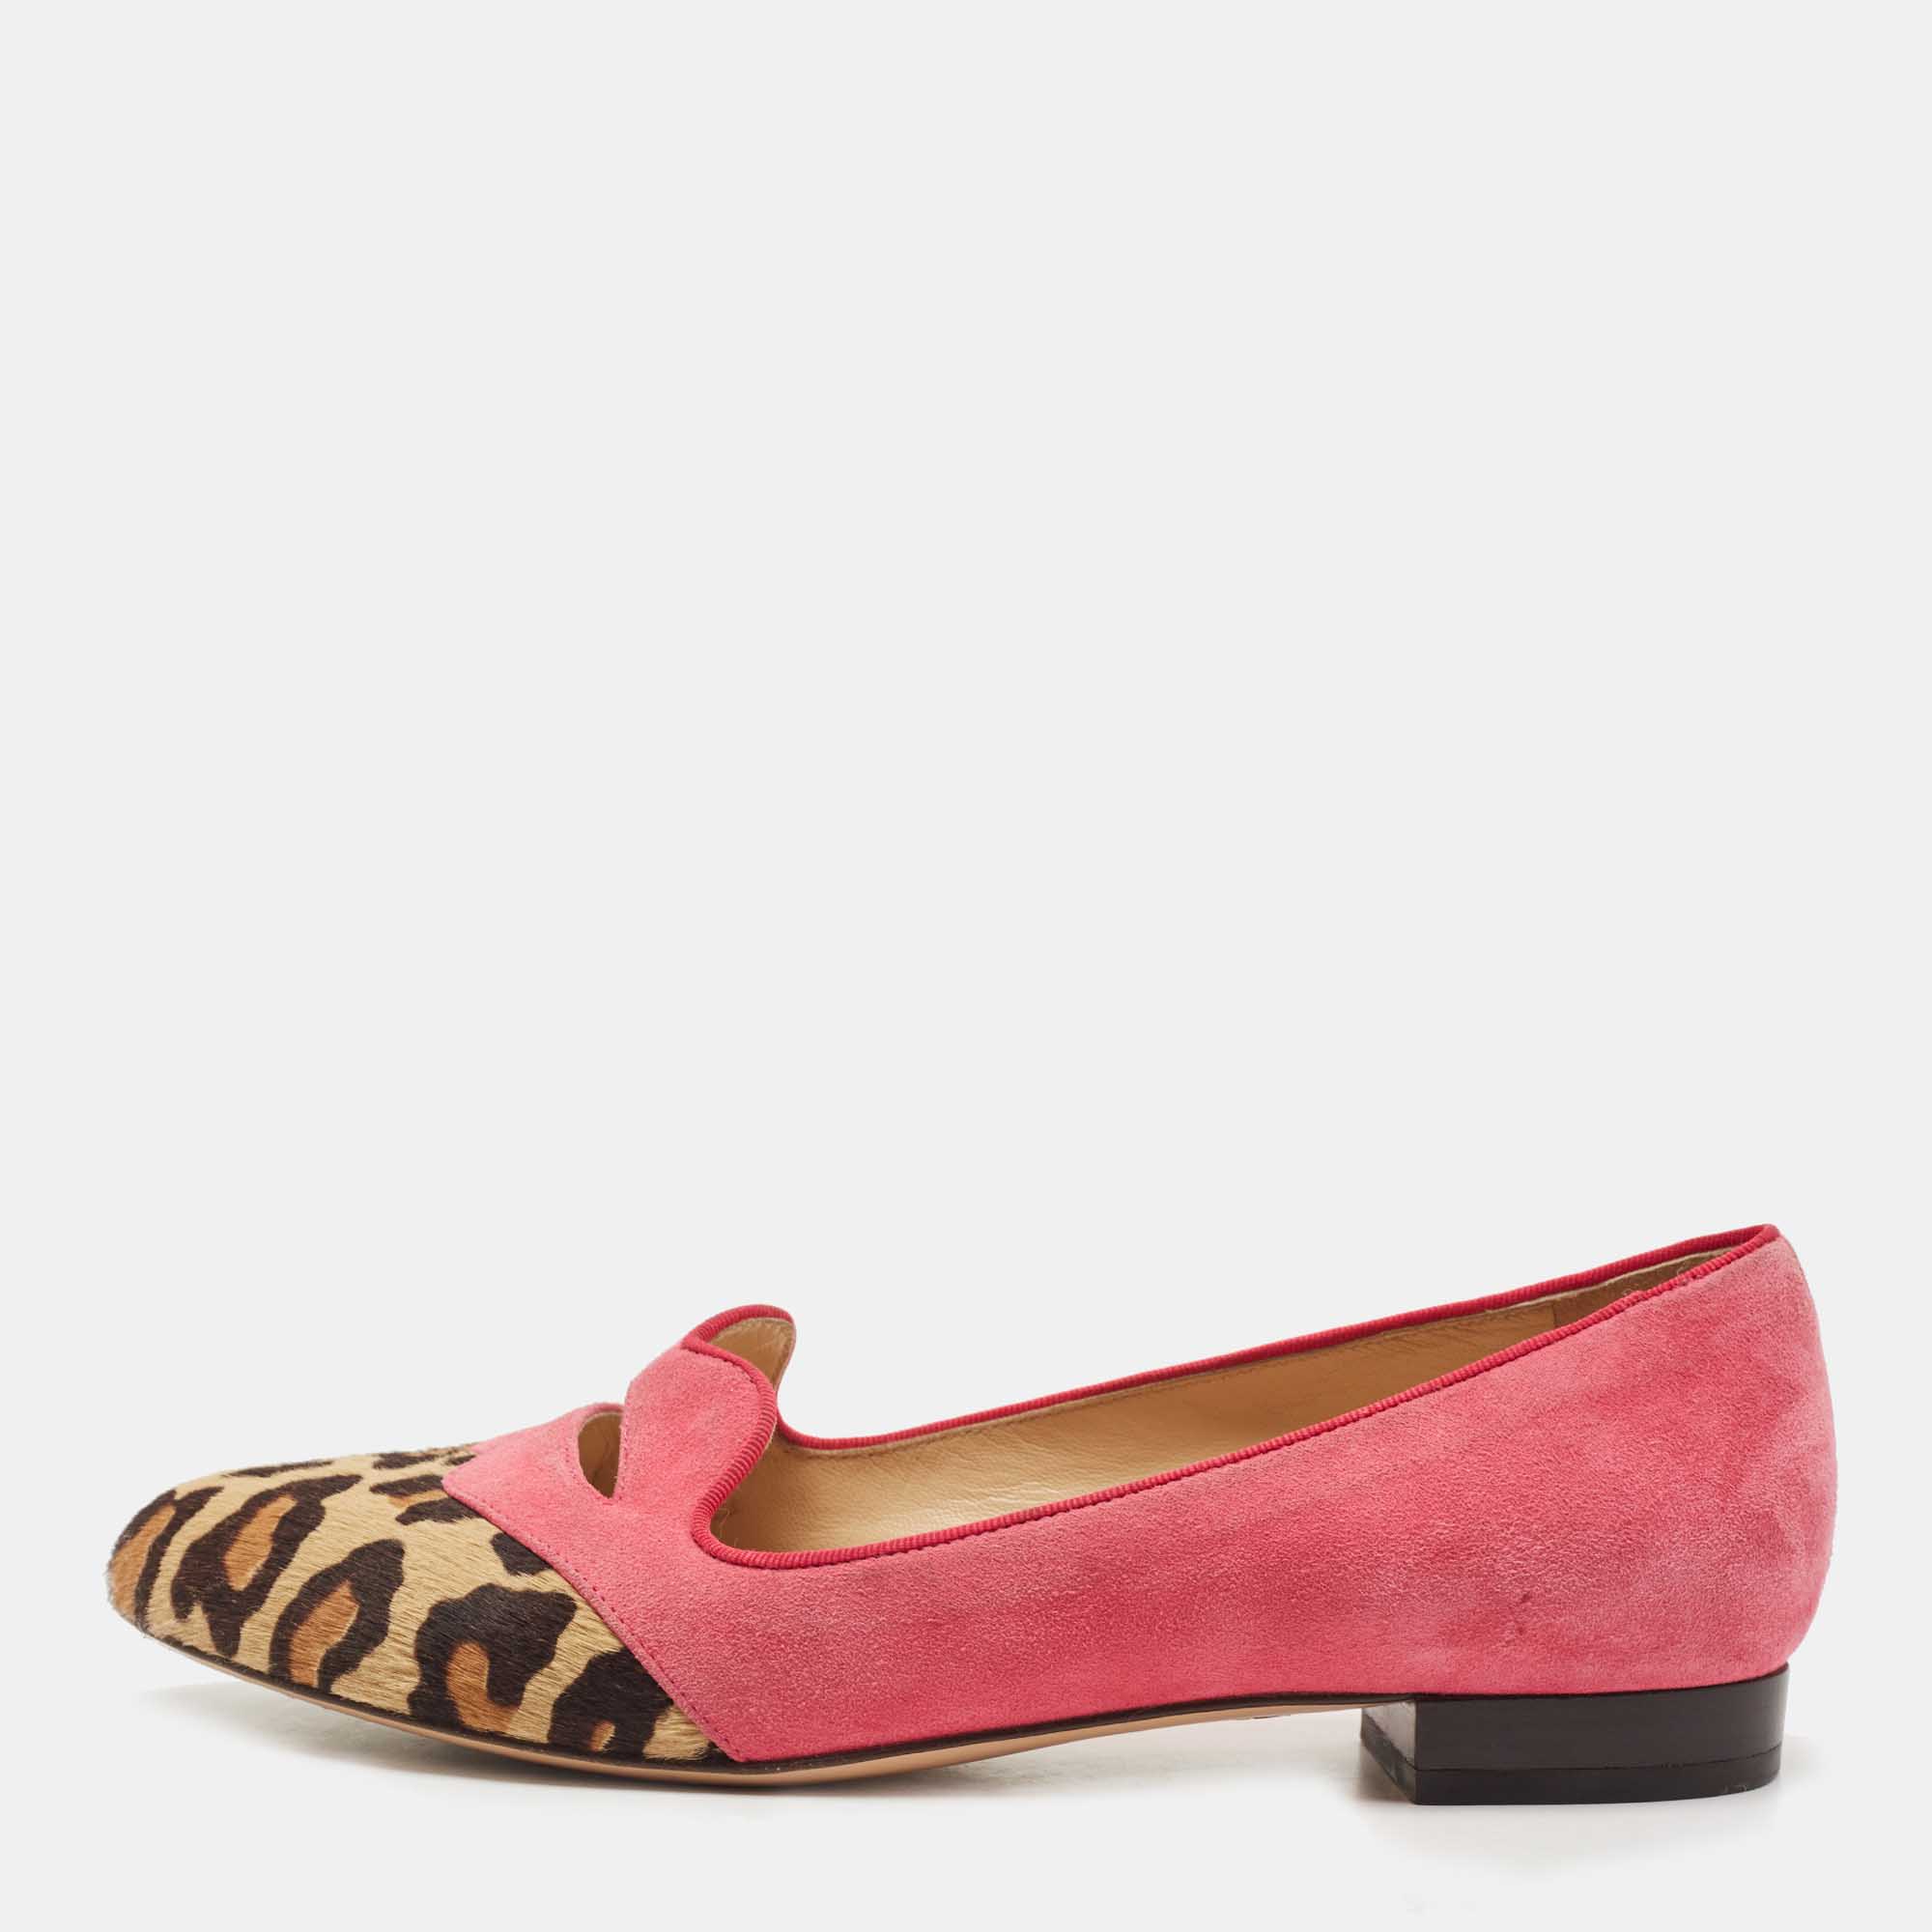 Charlotte Olympia Pink/Brown Suede And Calf Hair Smoking Loafers Size 36